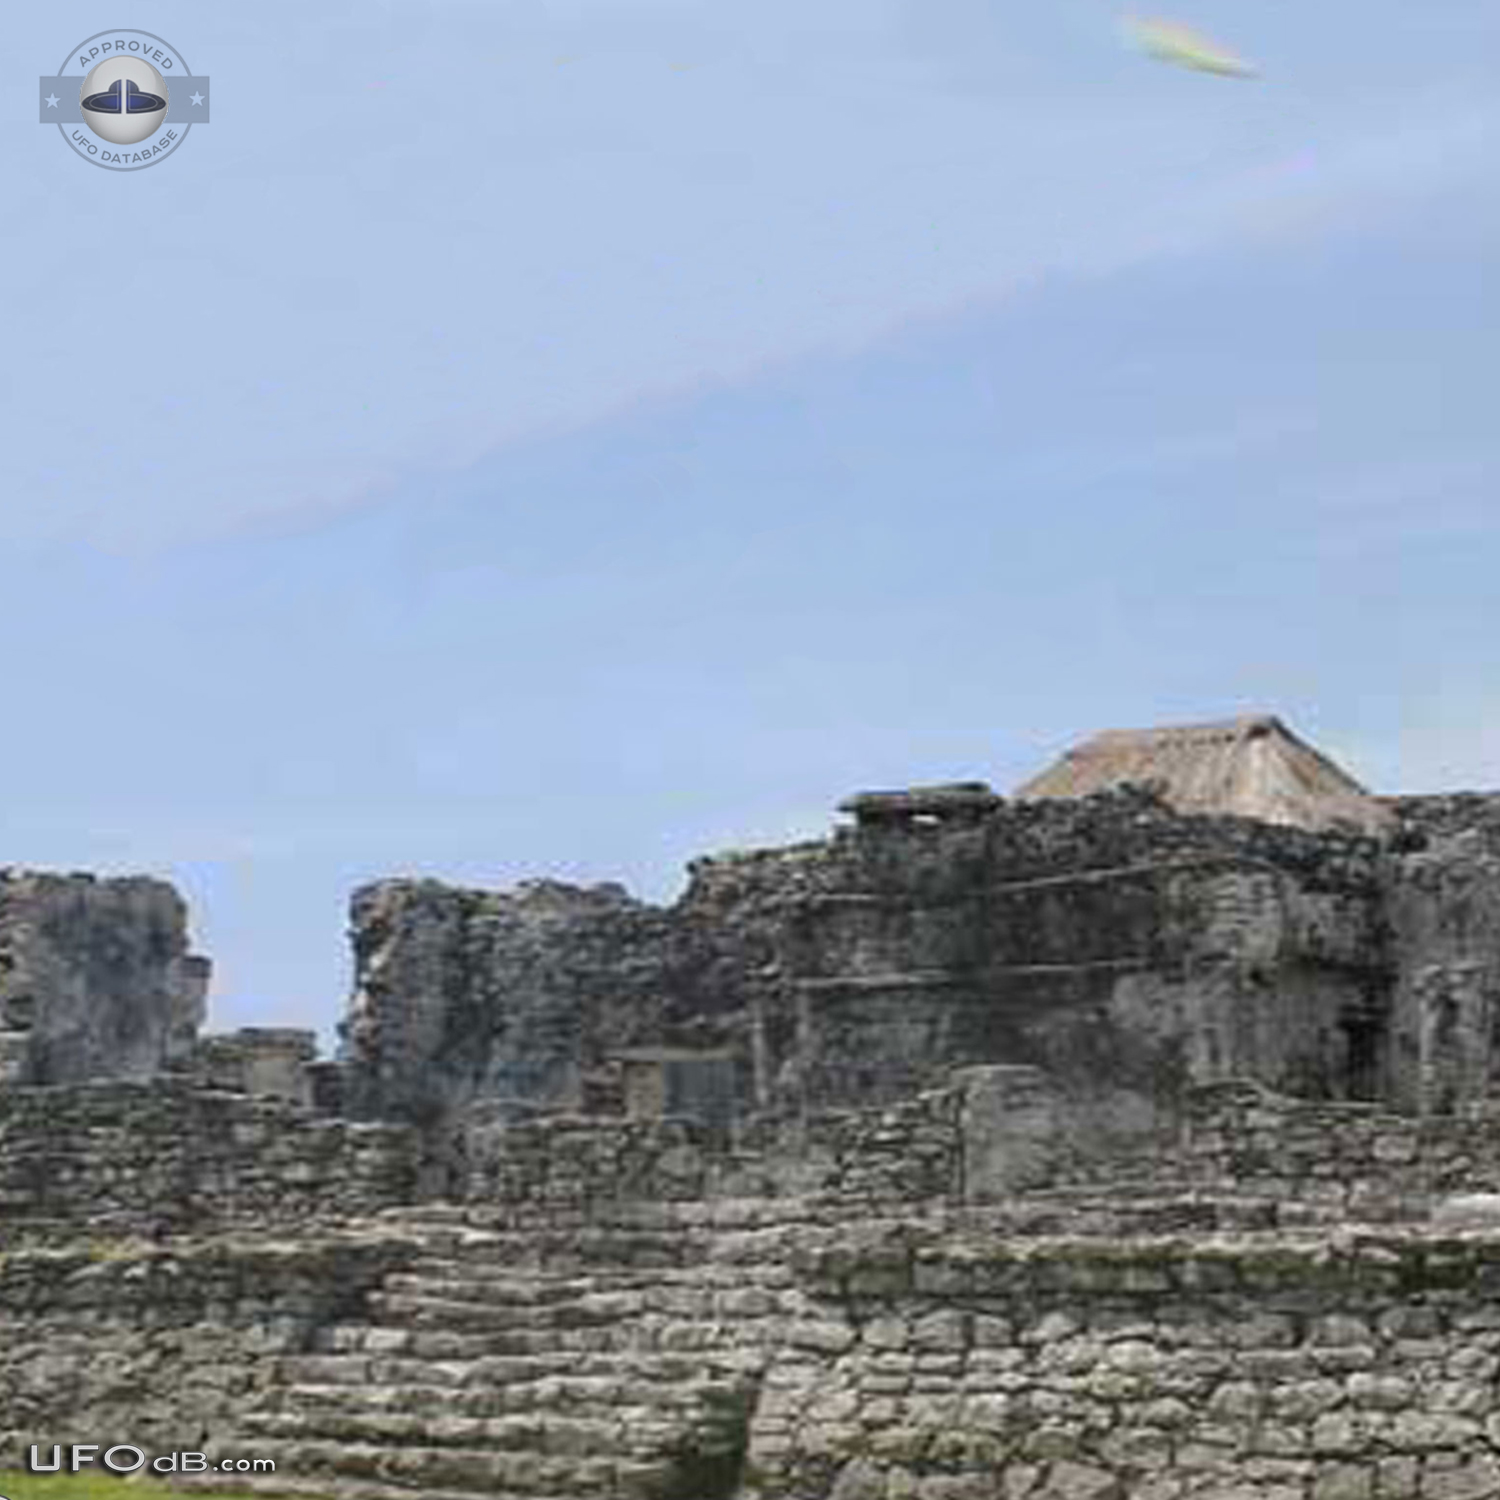 Saucer UFO caught on picture near the Maya city ruins of Tulum - 2011 UFO Picture #413-2